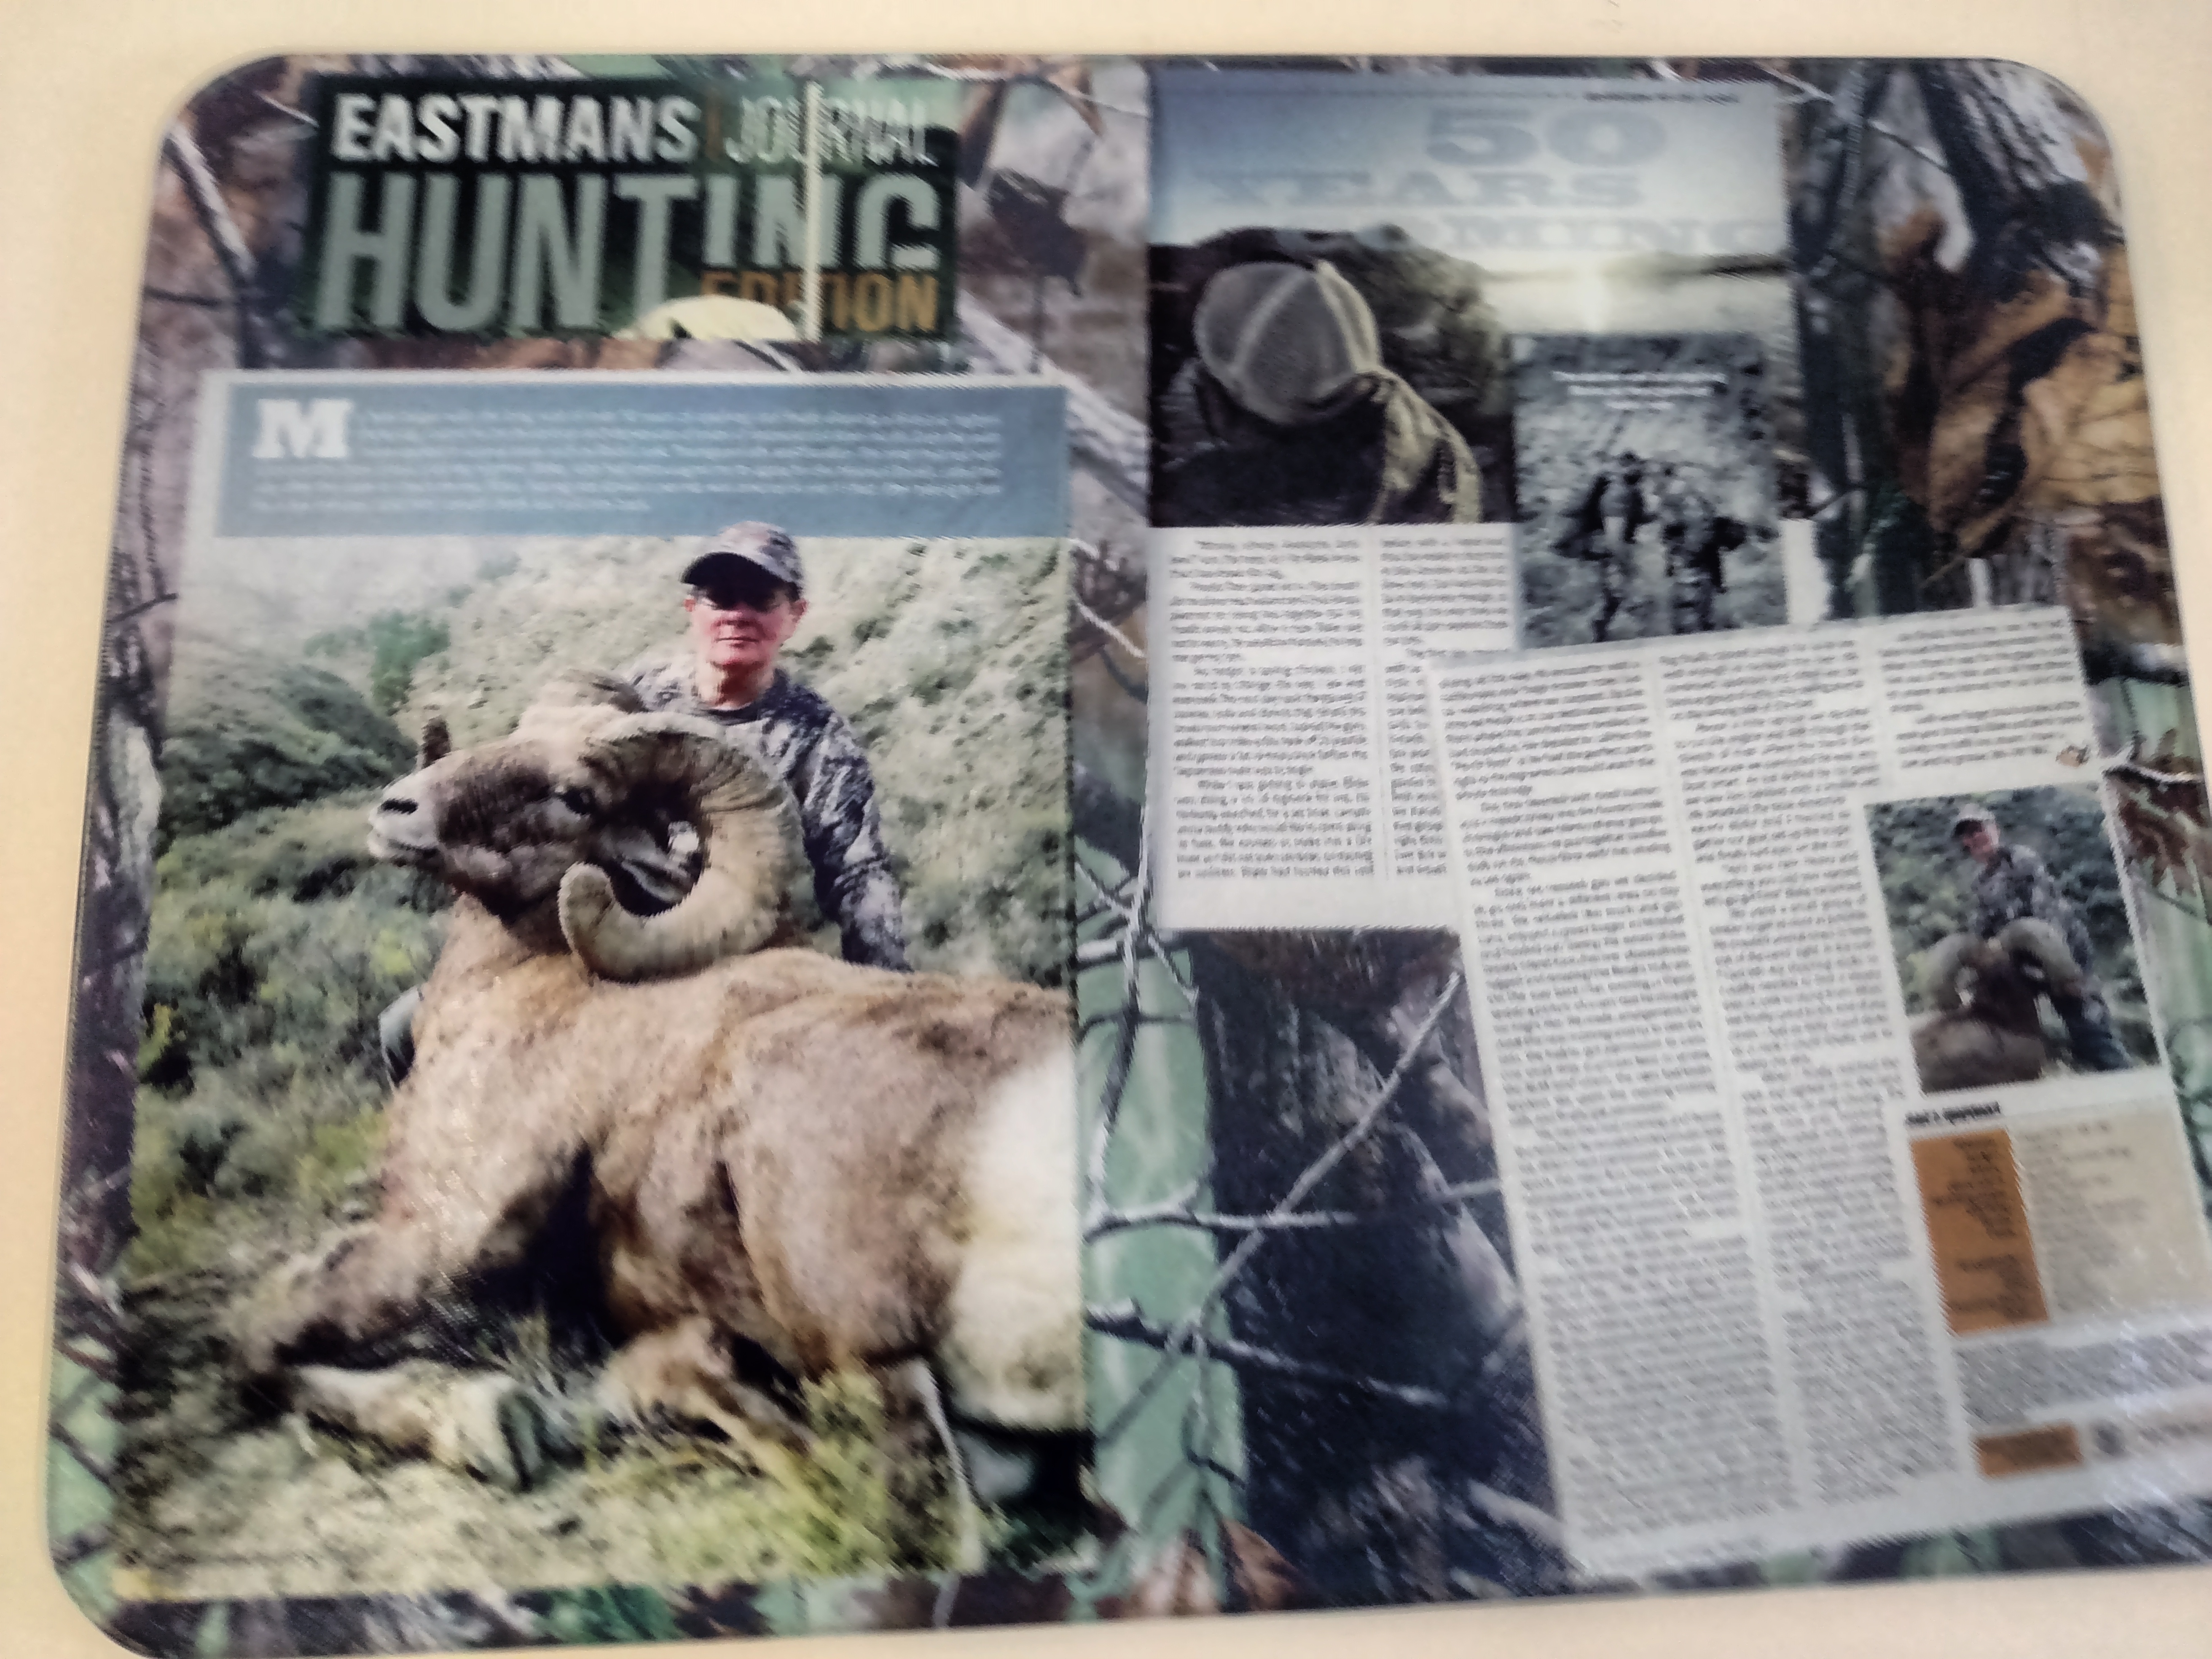 Hunters Cutting Board made with sublimation printing